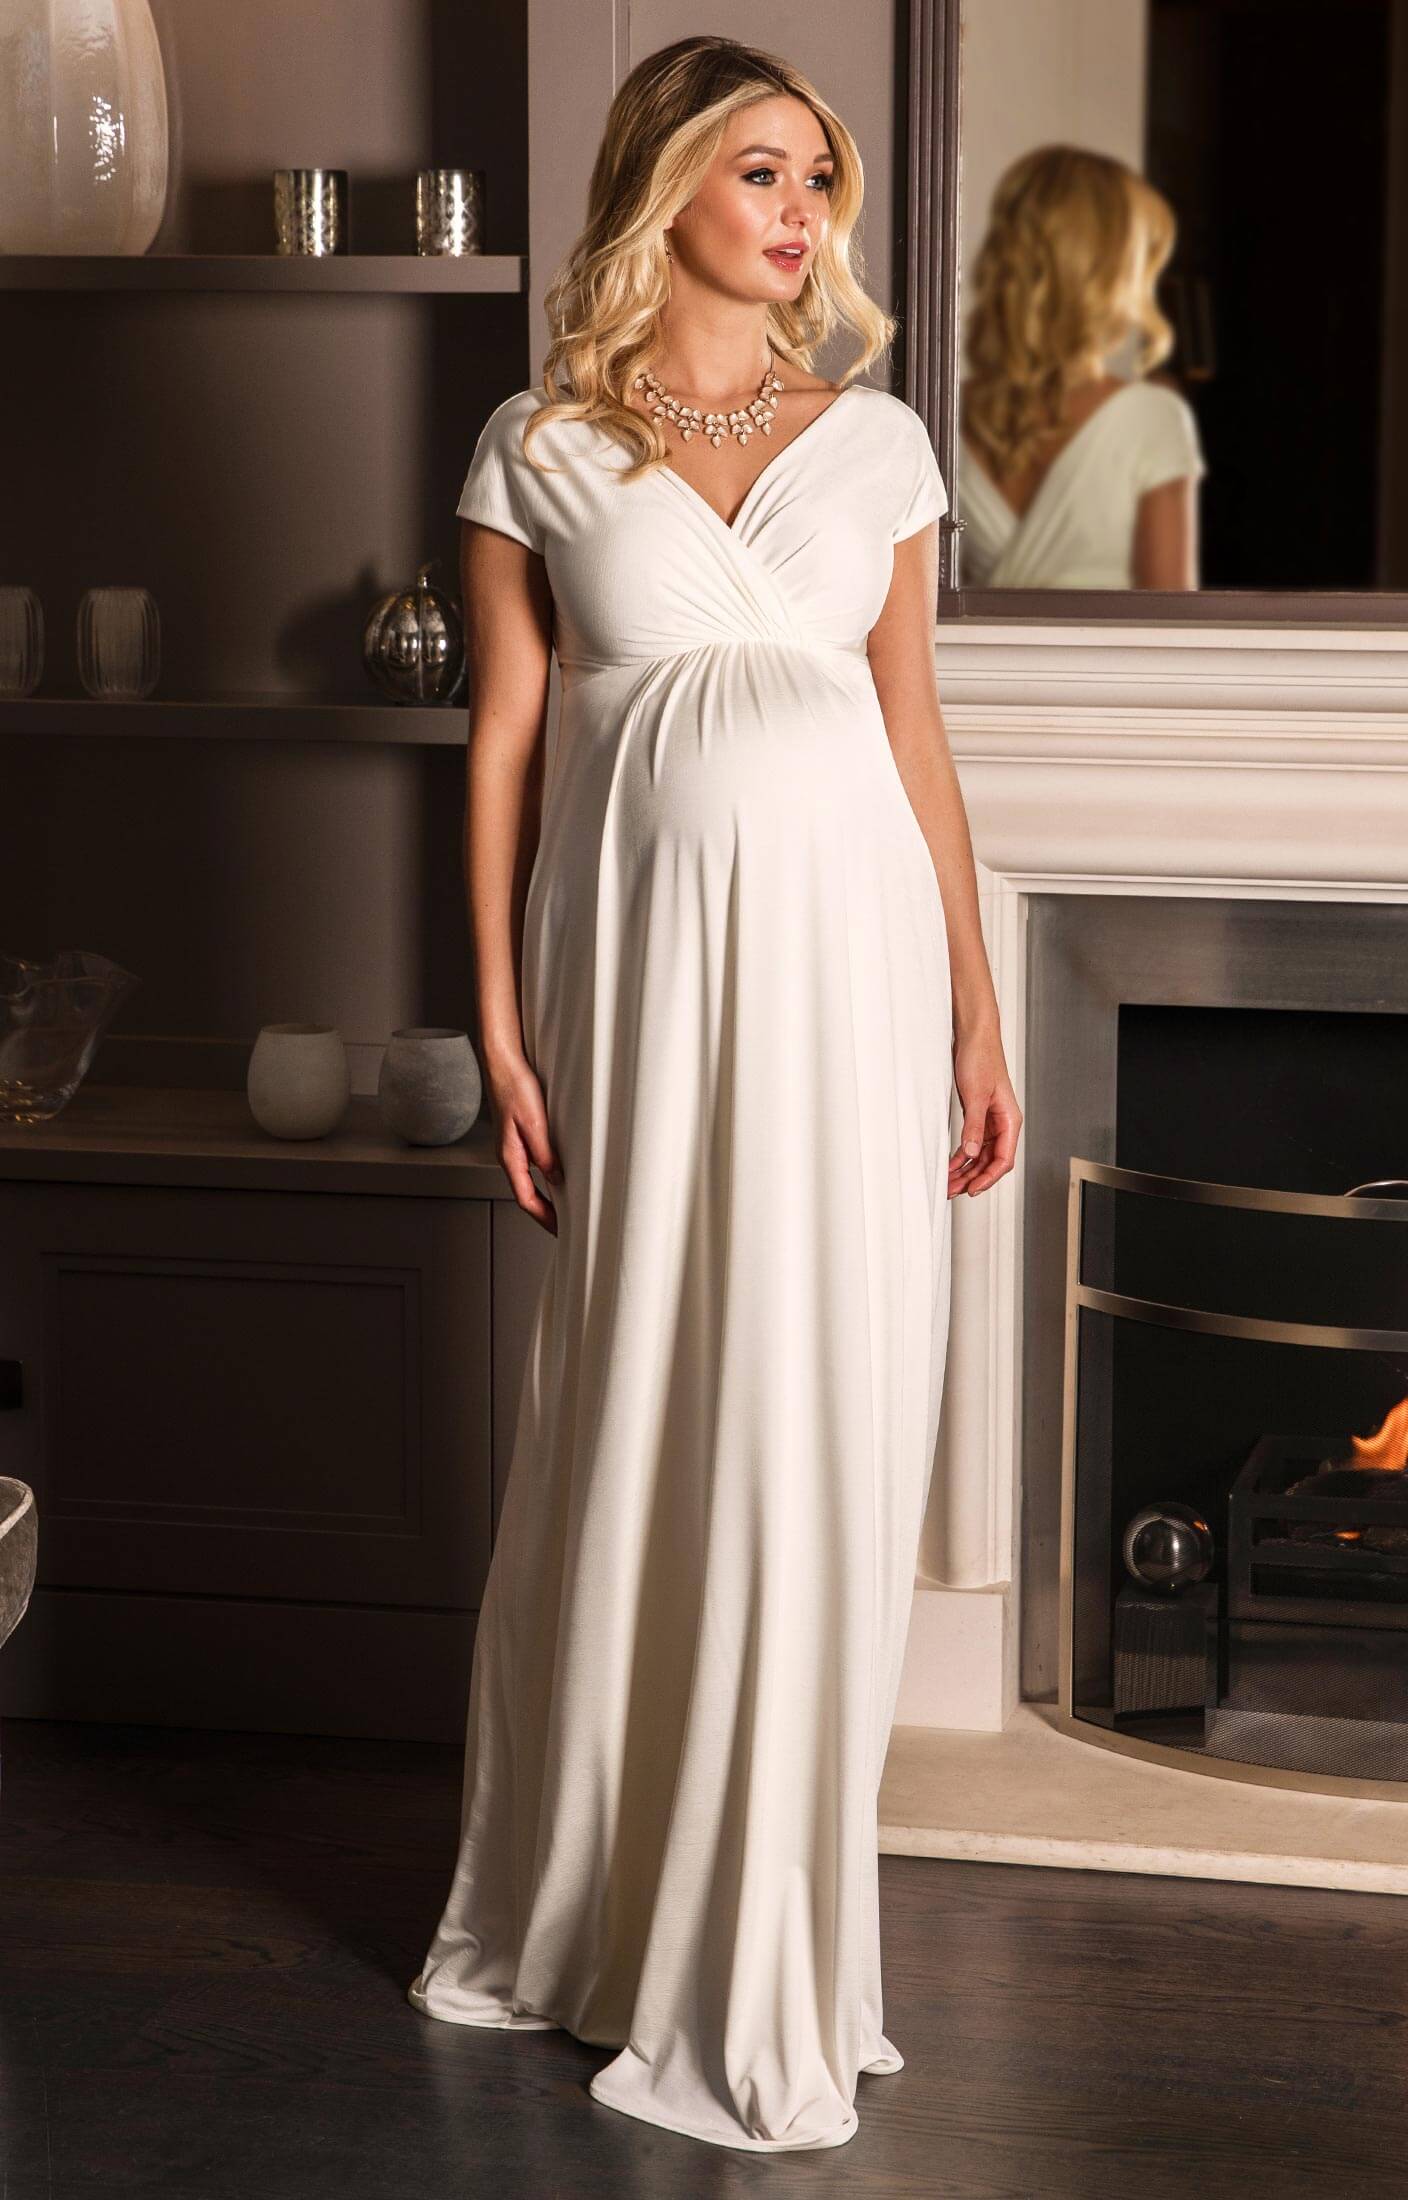 Maternity Maxi Dresses For Weddings Dresses Images 2022